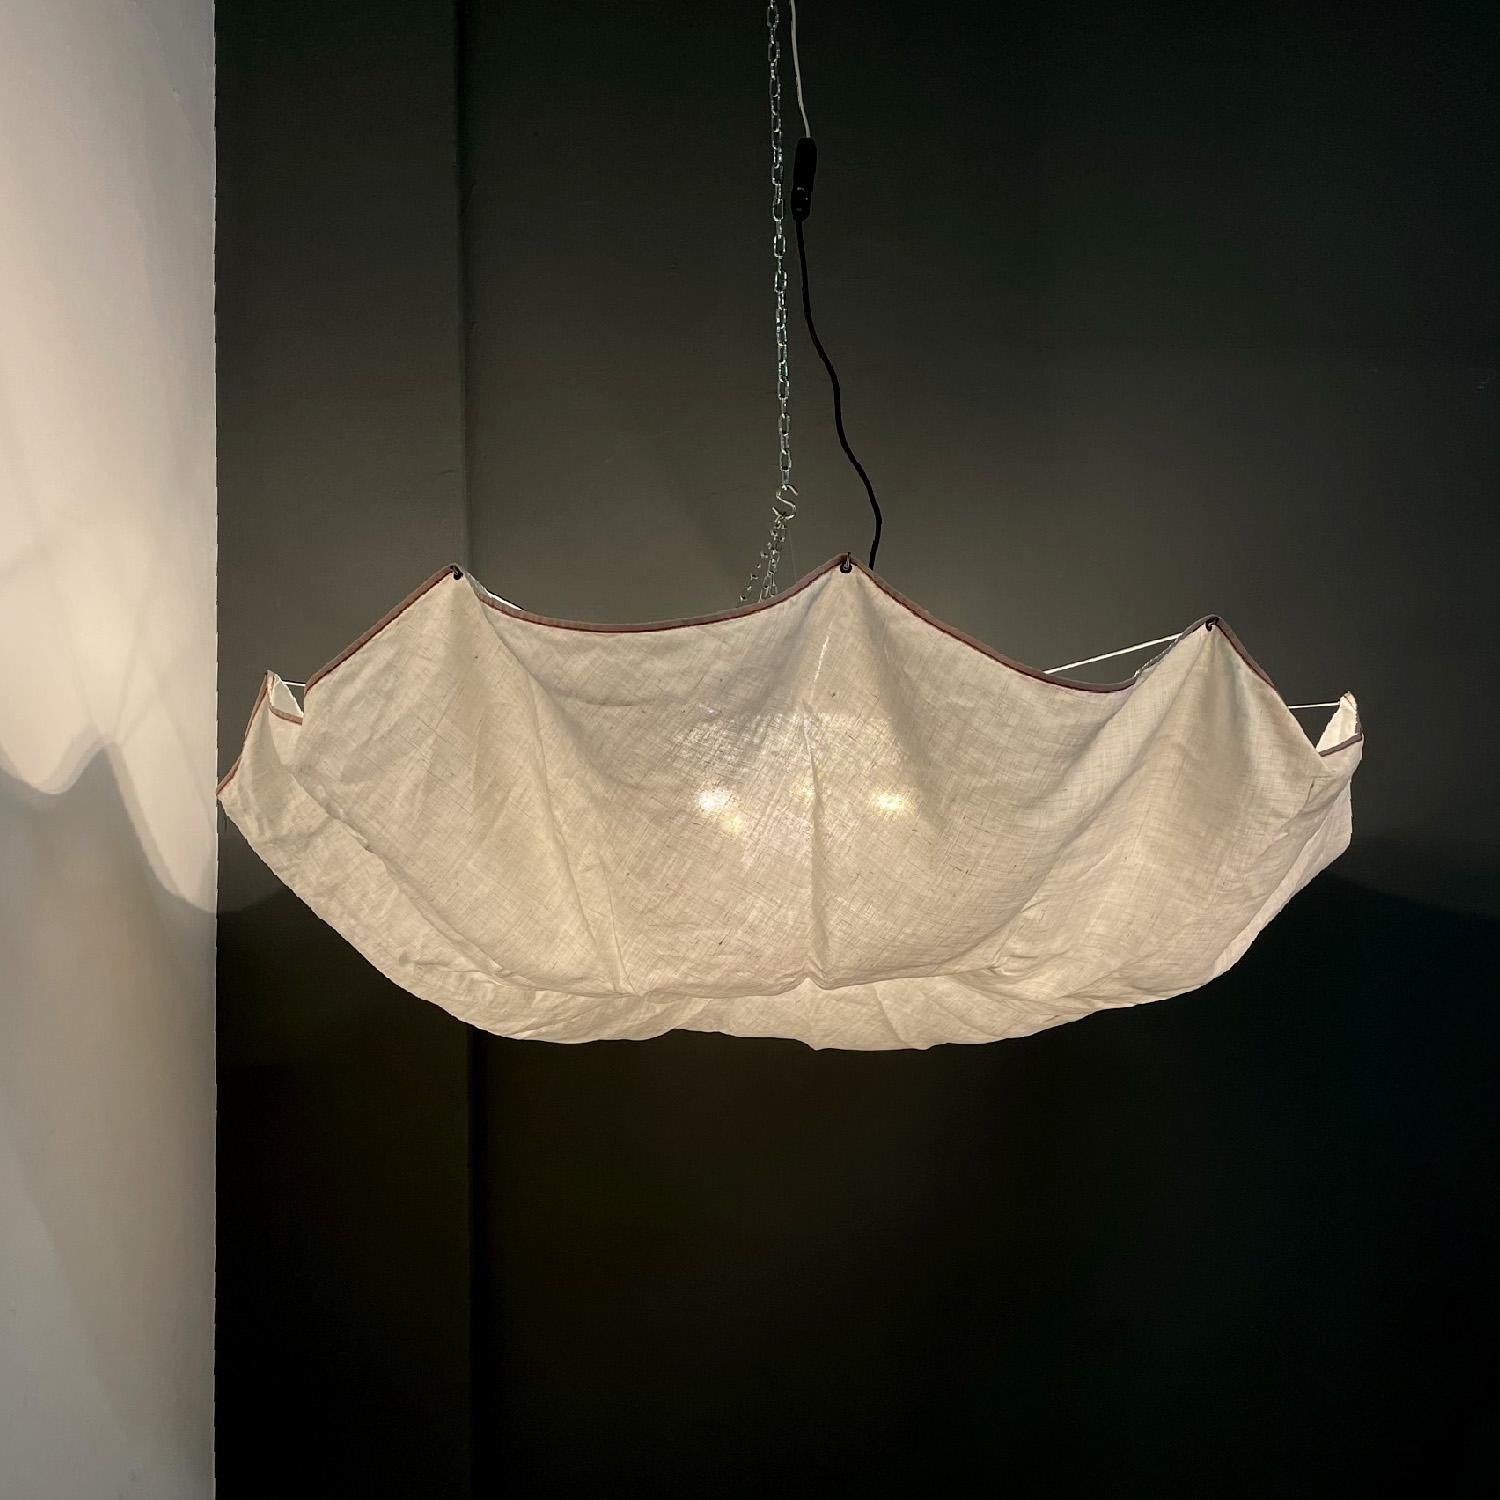 Italian modern chandelier 1130 Celestia by Afra and Tobia Scarpa for Flos, 1980s
Chandelier mod. 1130 Celestia with suspended diffuser in white linen fabric with light orange and red piping, fixed to a pressed aluminum frame, powder coated white and